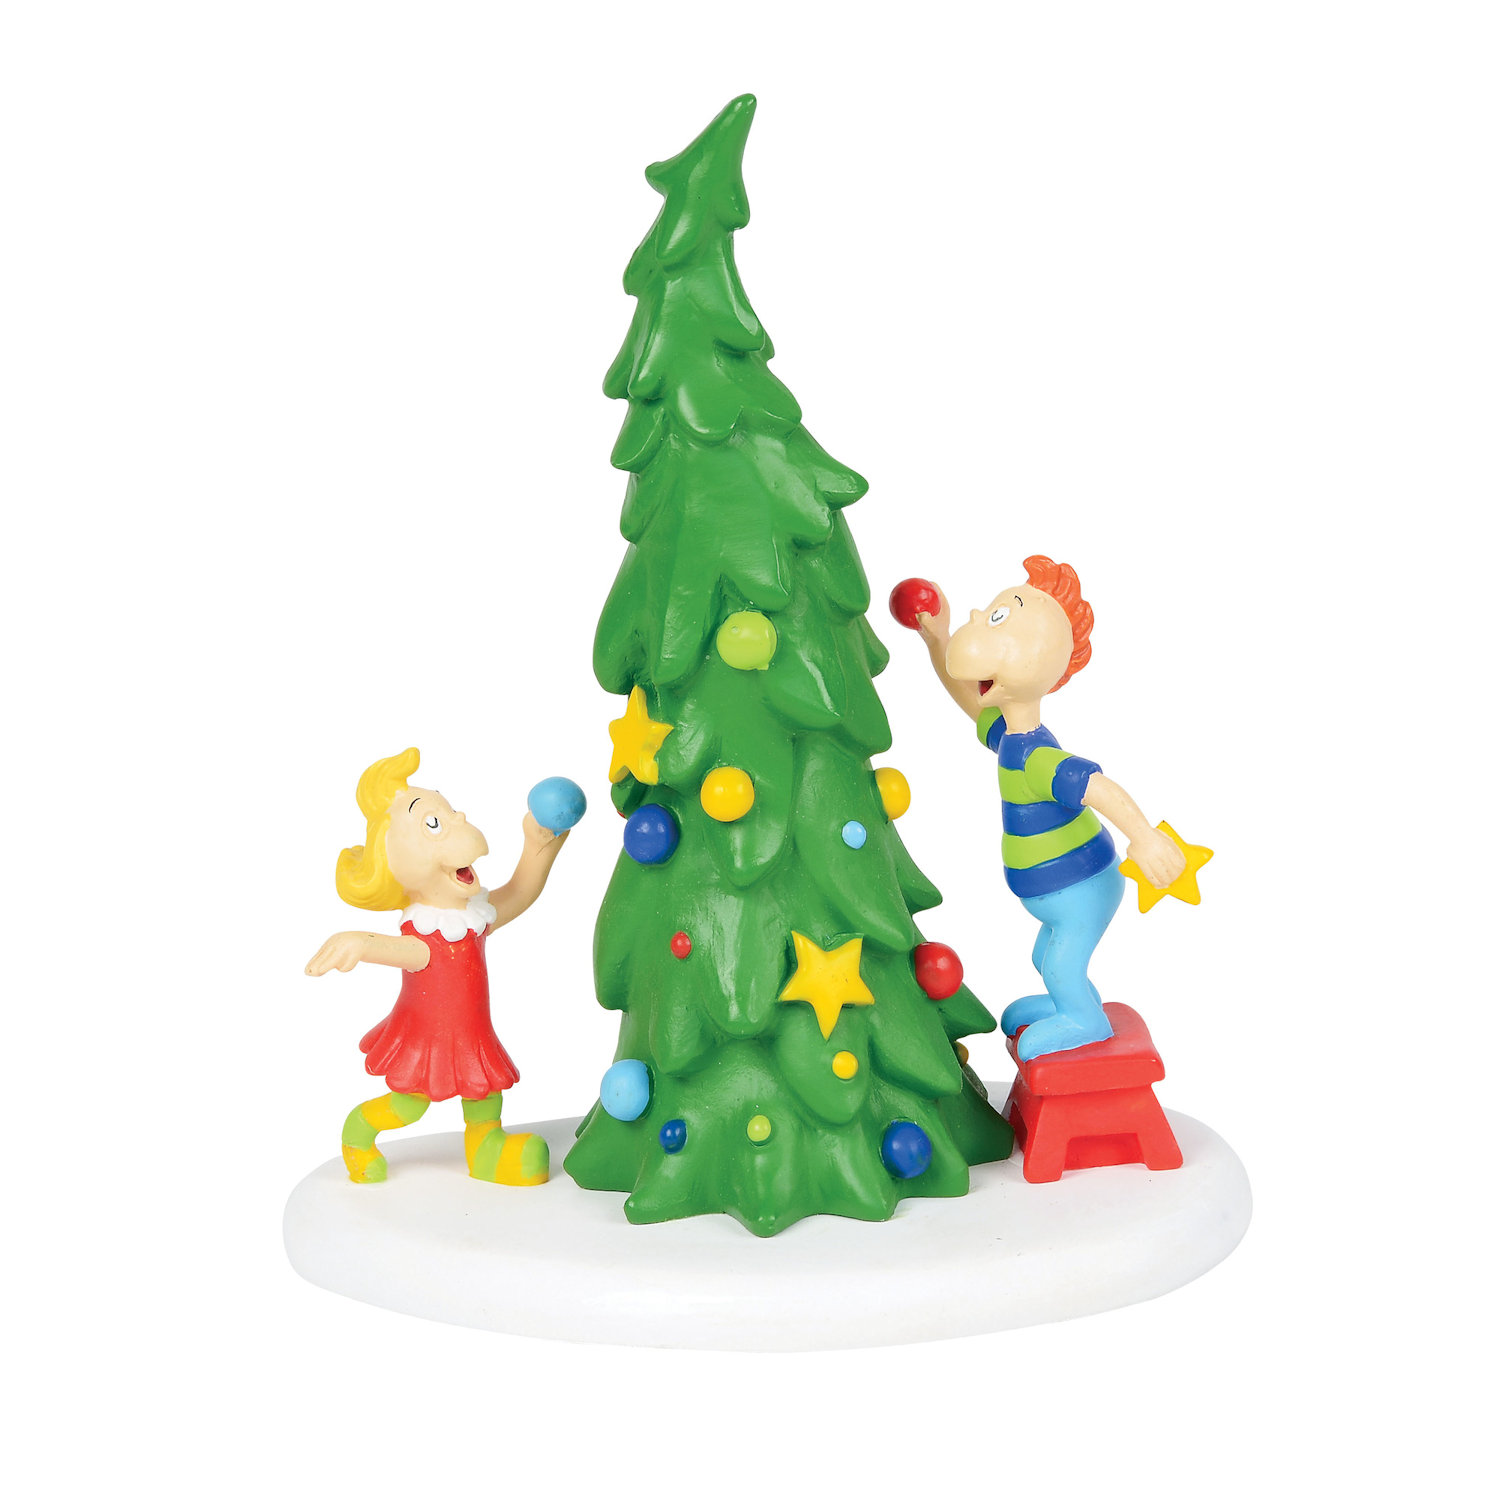 Department 56 Grinch Village Who-Ville Christmas Tree Accessory